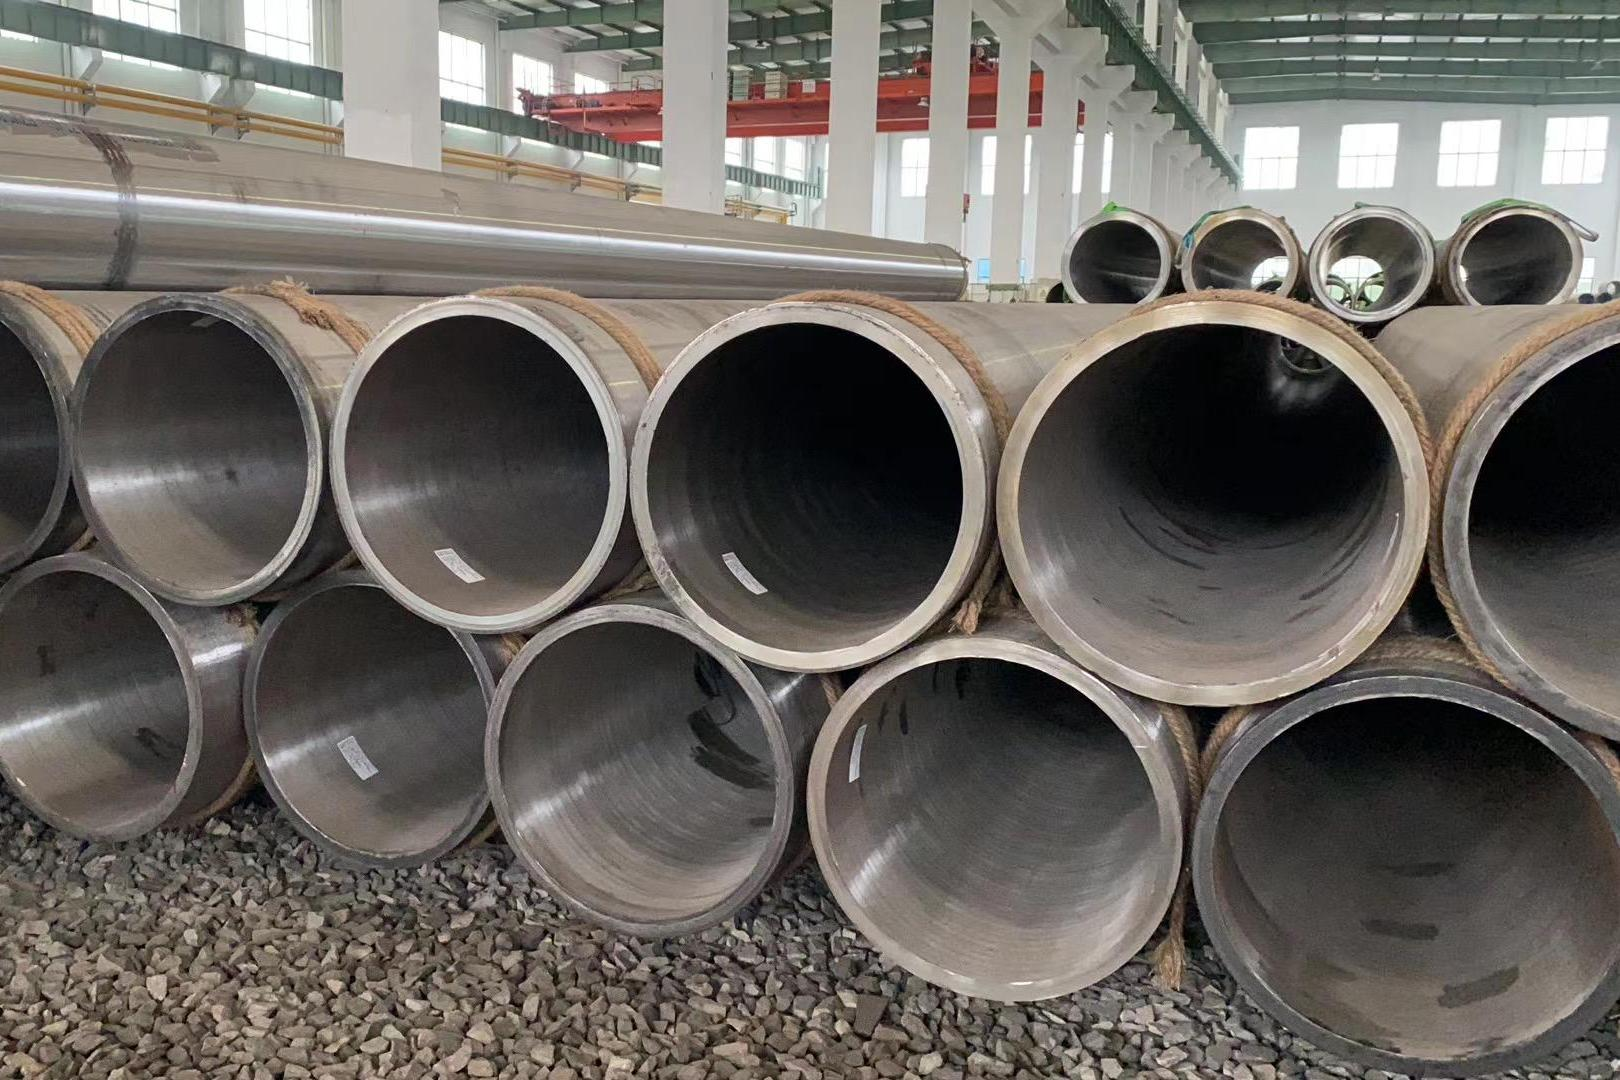 How to store seamless steel pipes